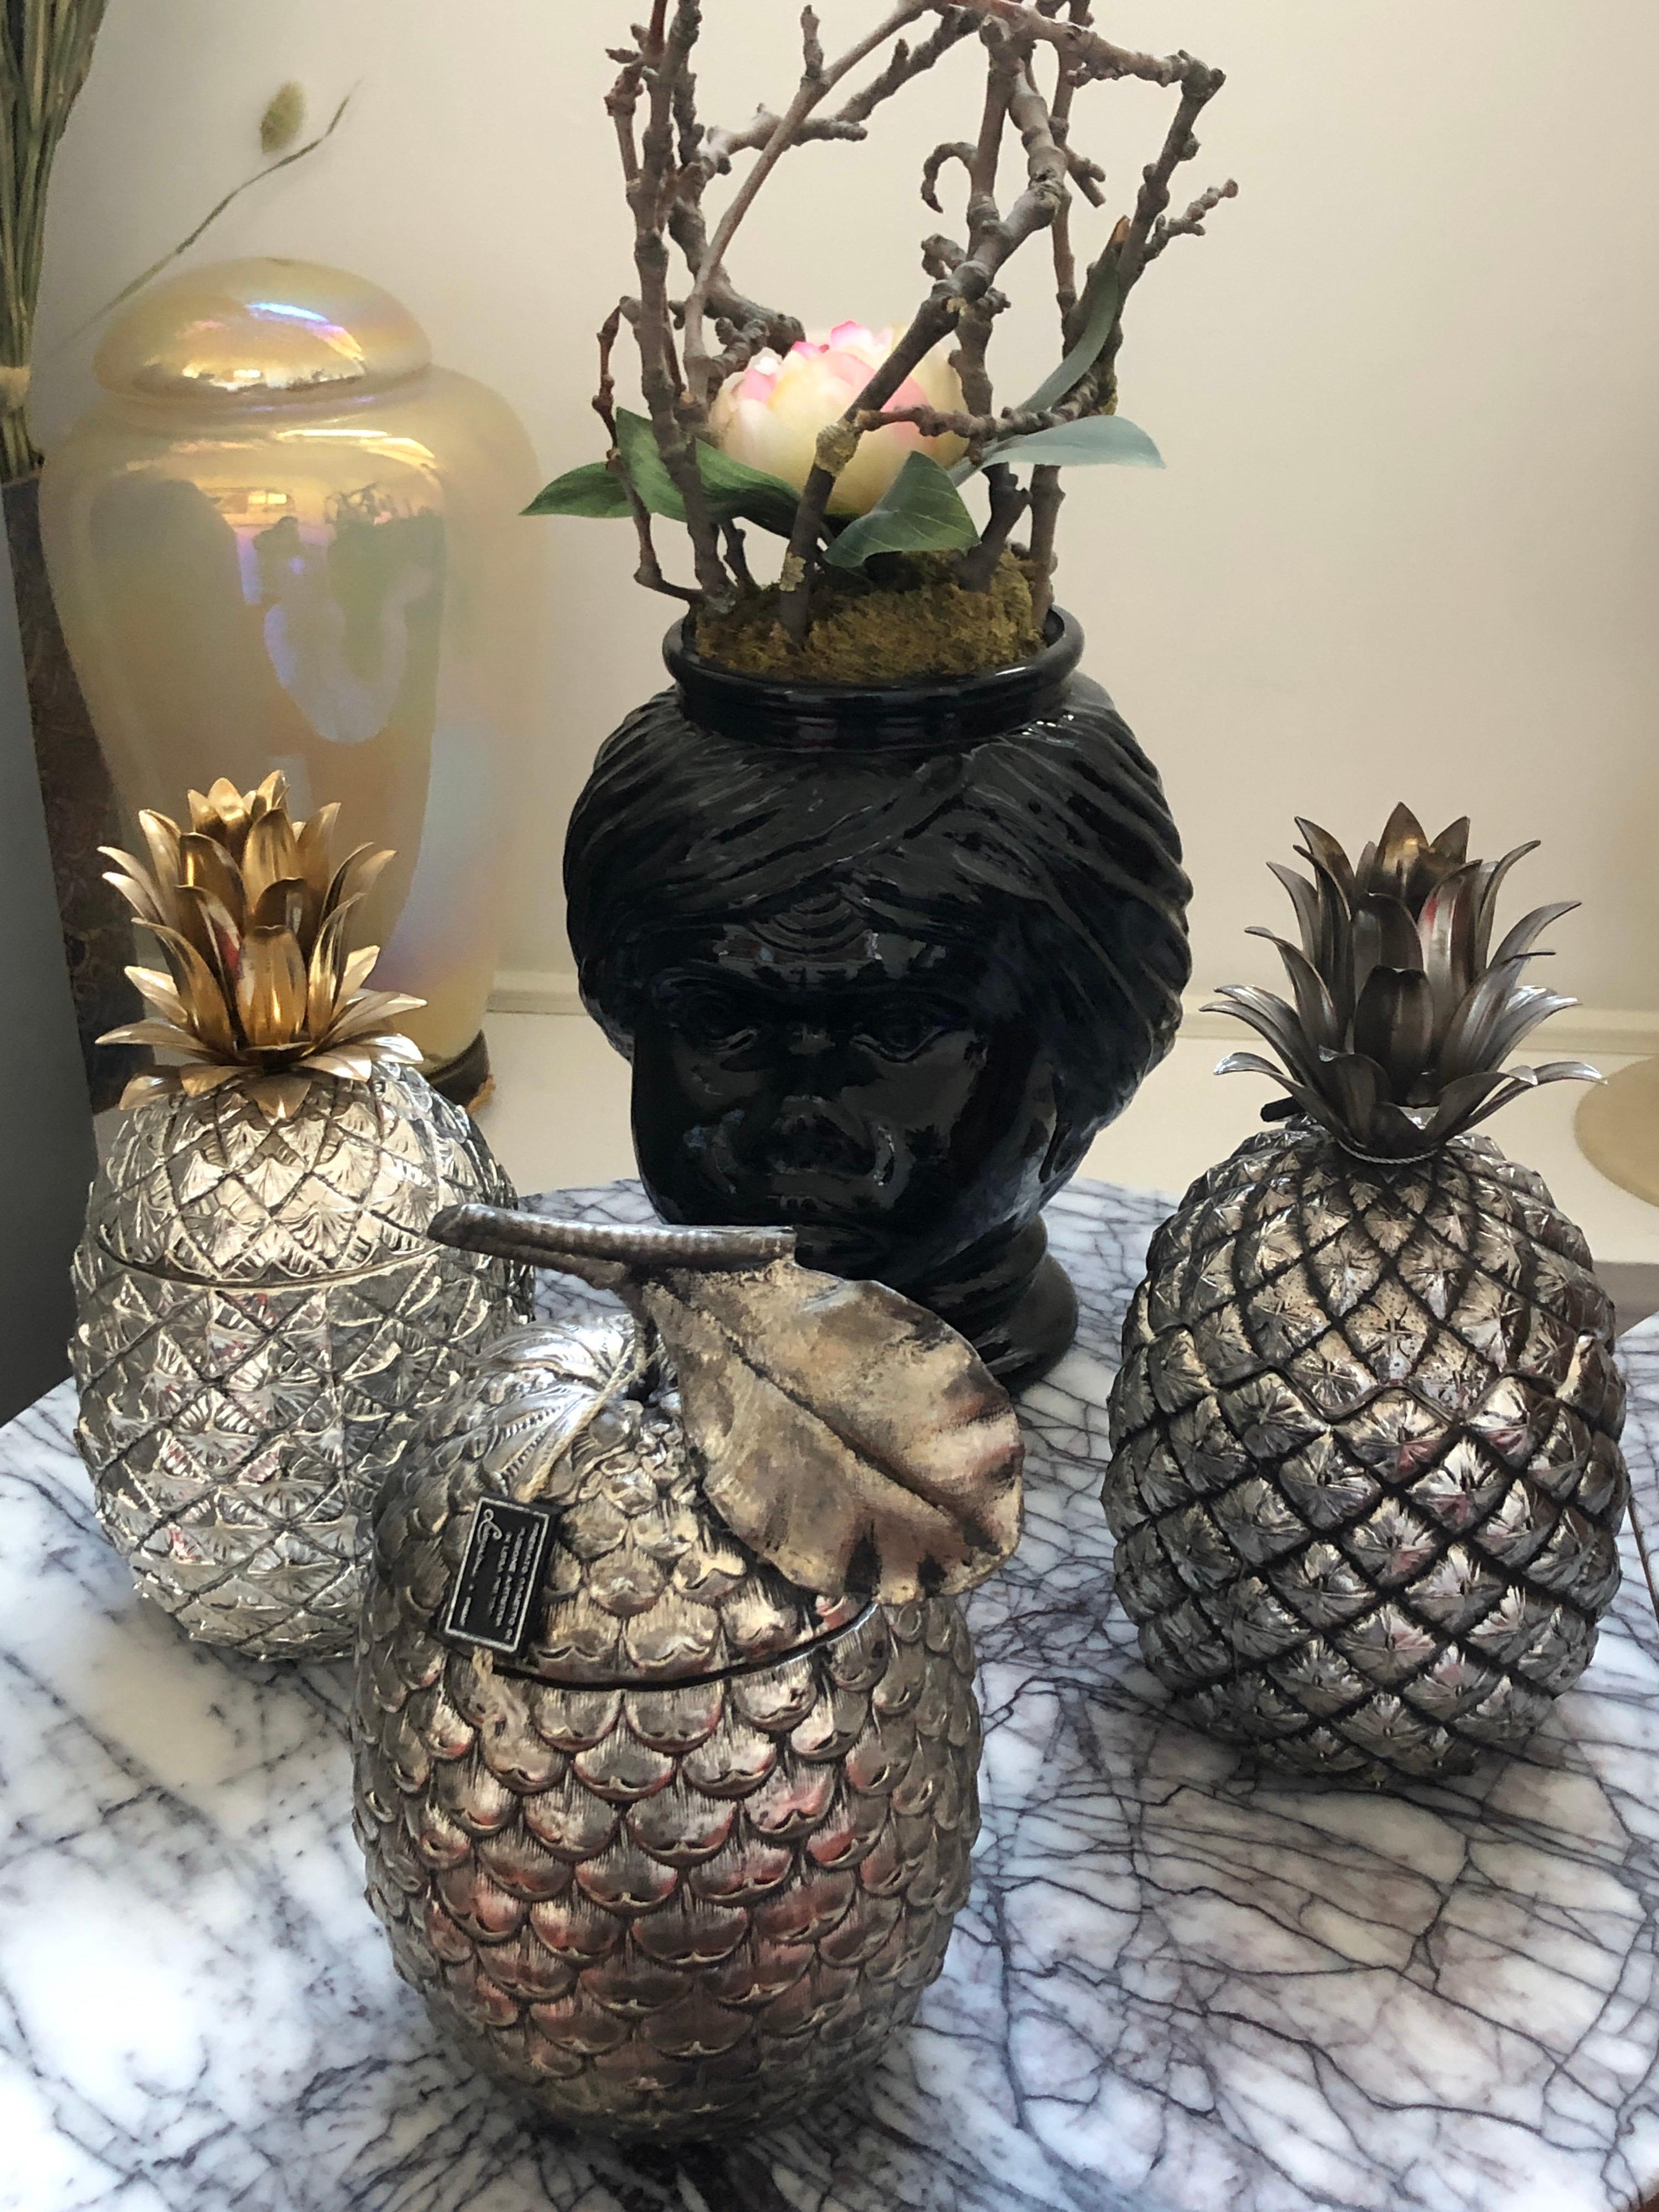 Large pineapple ice bucket designed by Mauro Manetti manufactured by Fonderia d'Arte Firenze in 1950.
As you see the inside, this piece has never been used and still have it original label on one side is written:
Fonderia d'Arte Firenze Mauro